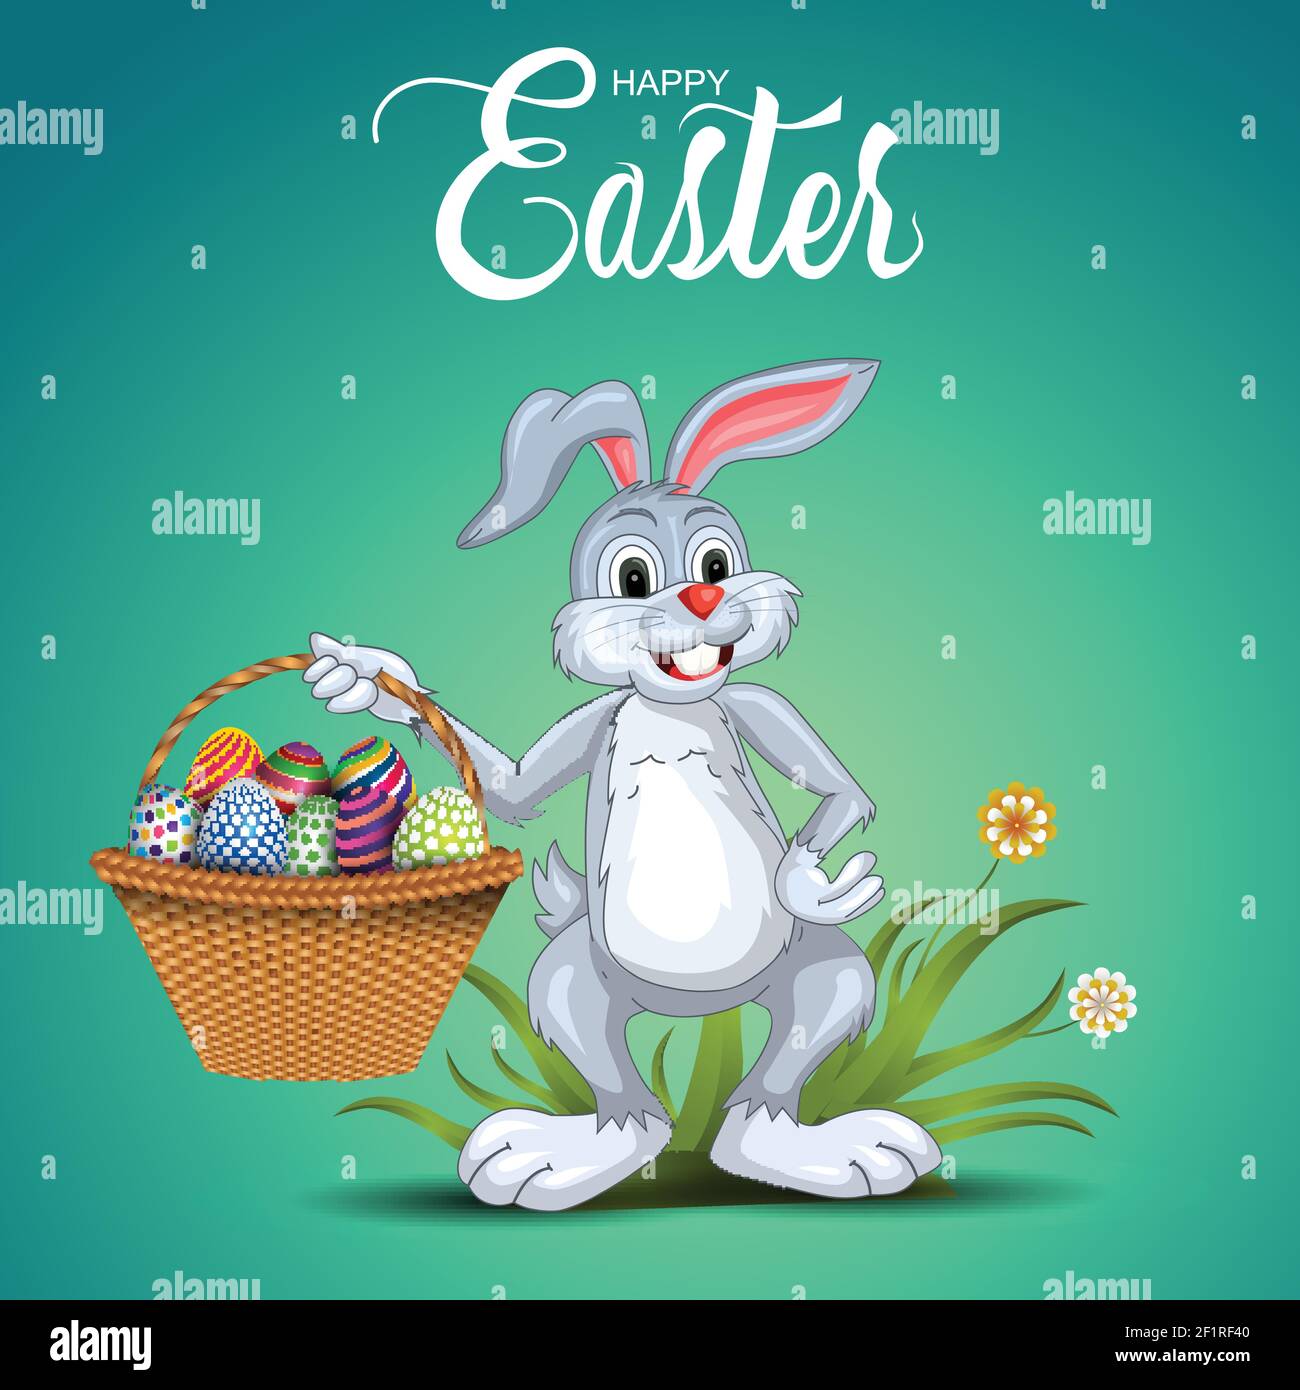 happy Easter greetings. Holding a funny rabbit egg basket in his hand. vector illustration design Stock Vector